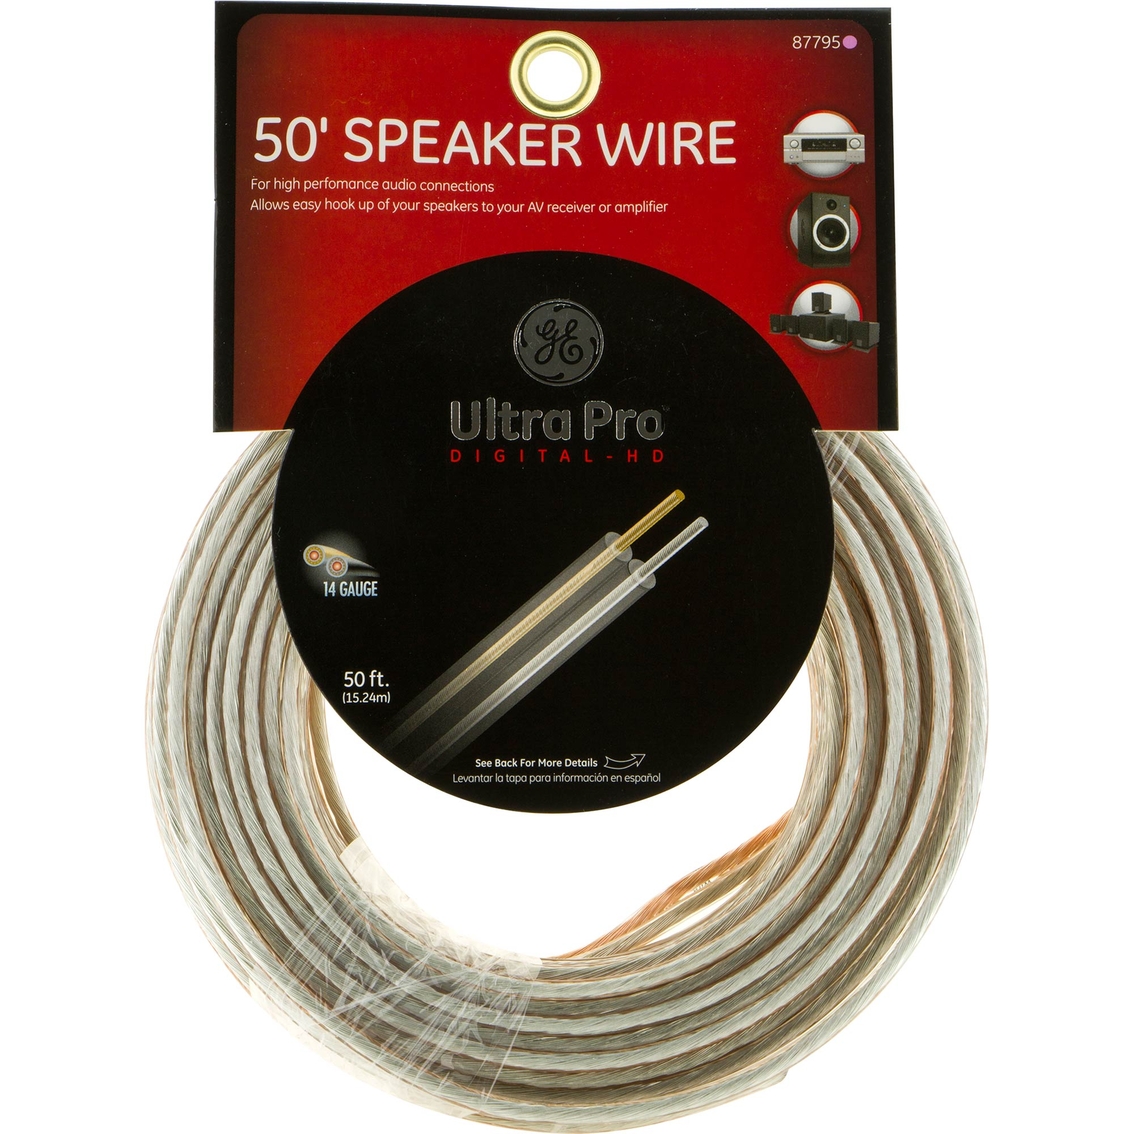 GE 50 ft. Ultra Pro Speaker Wire - Image 2 of 2